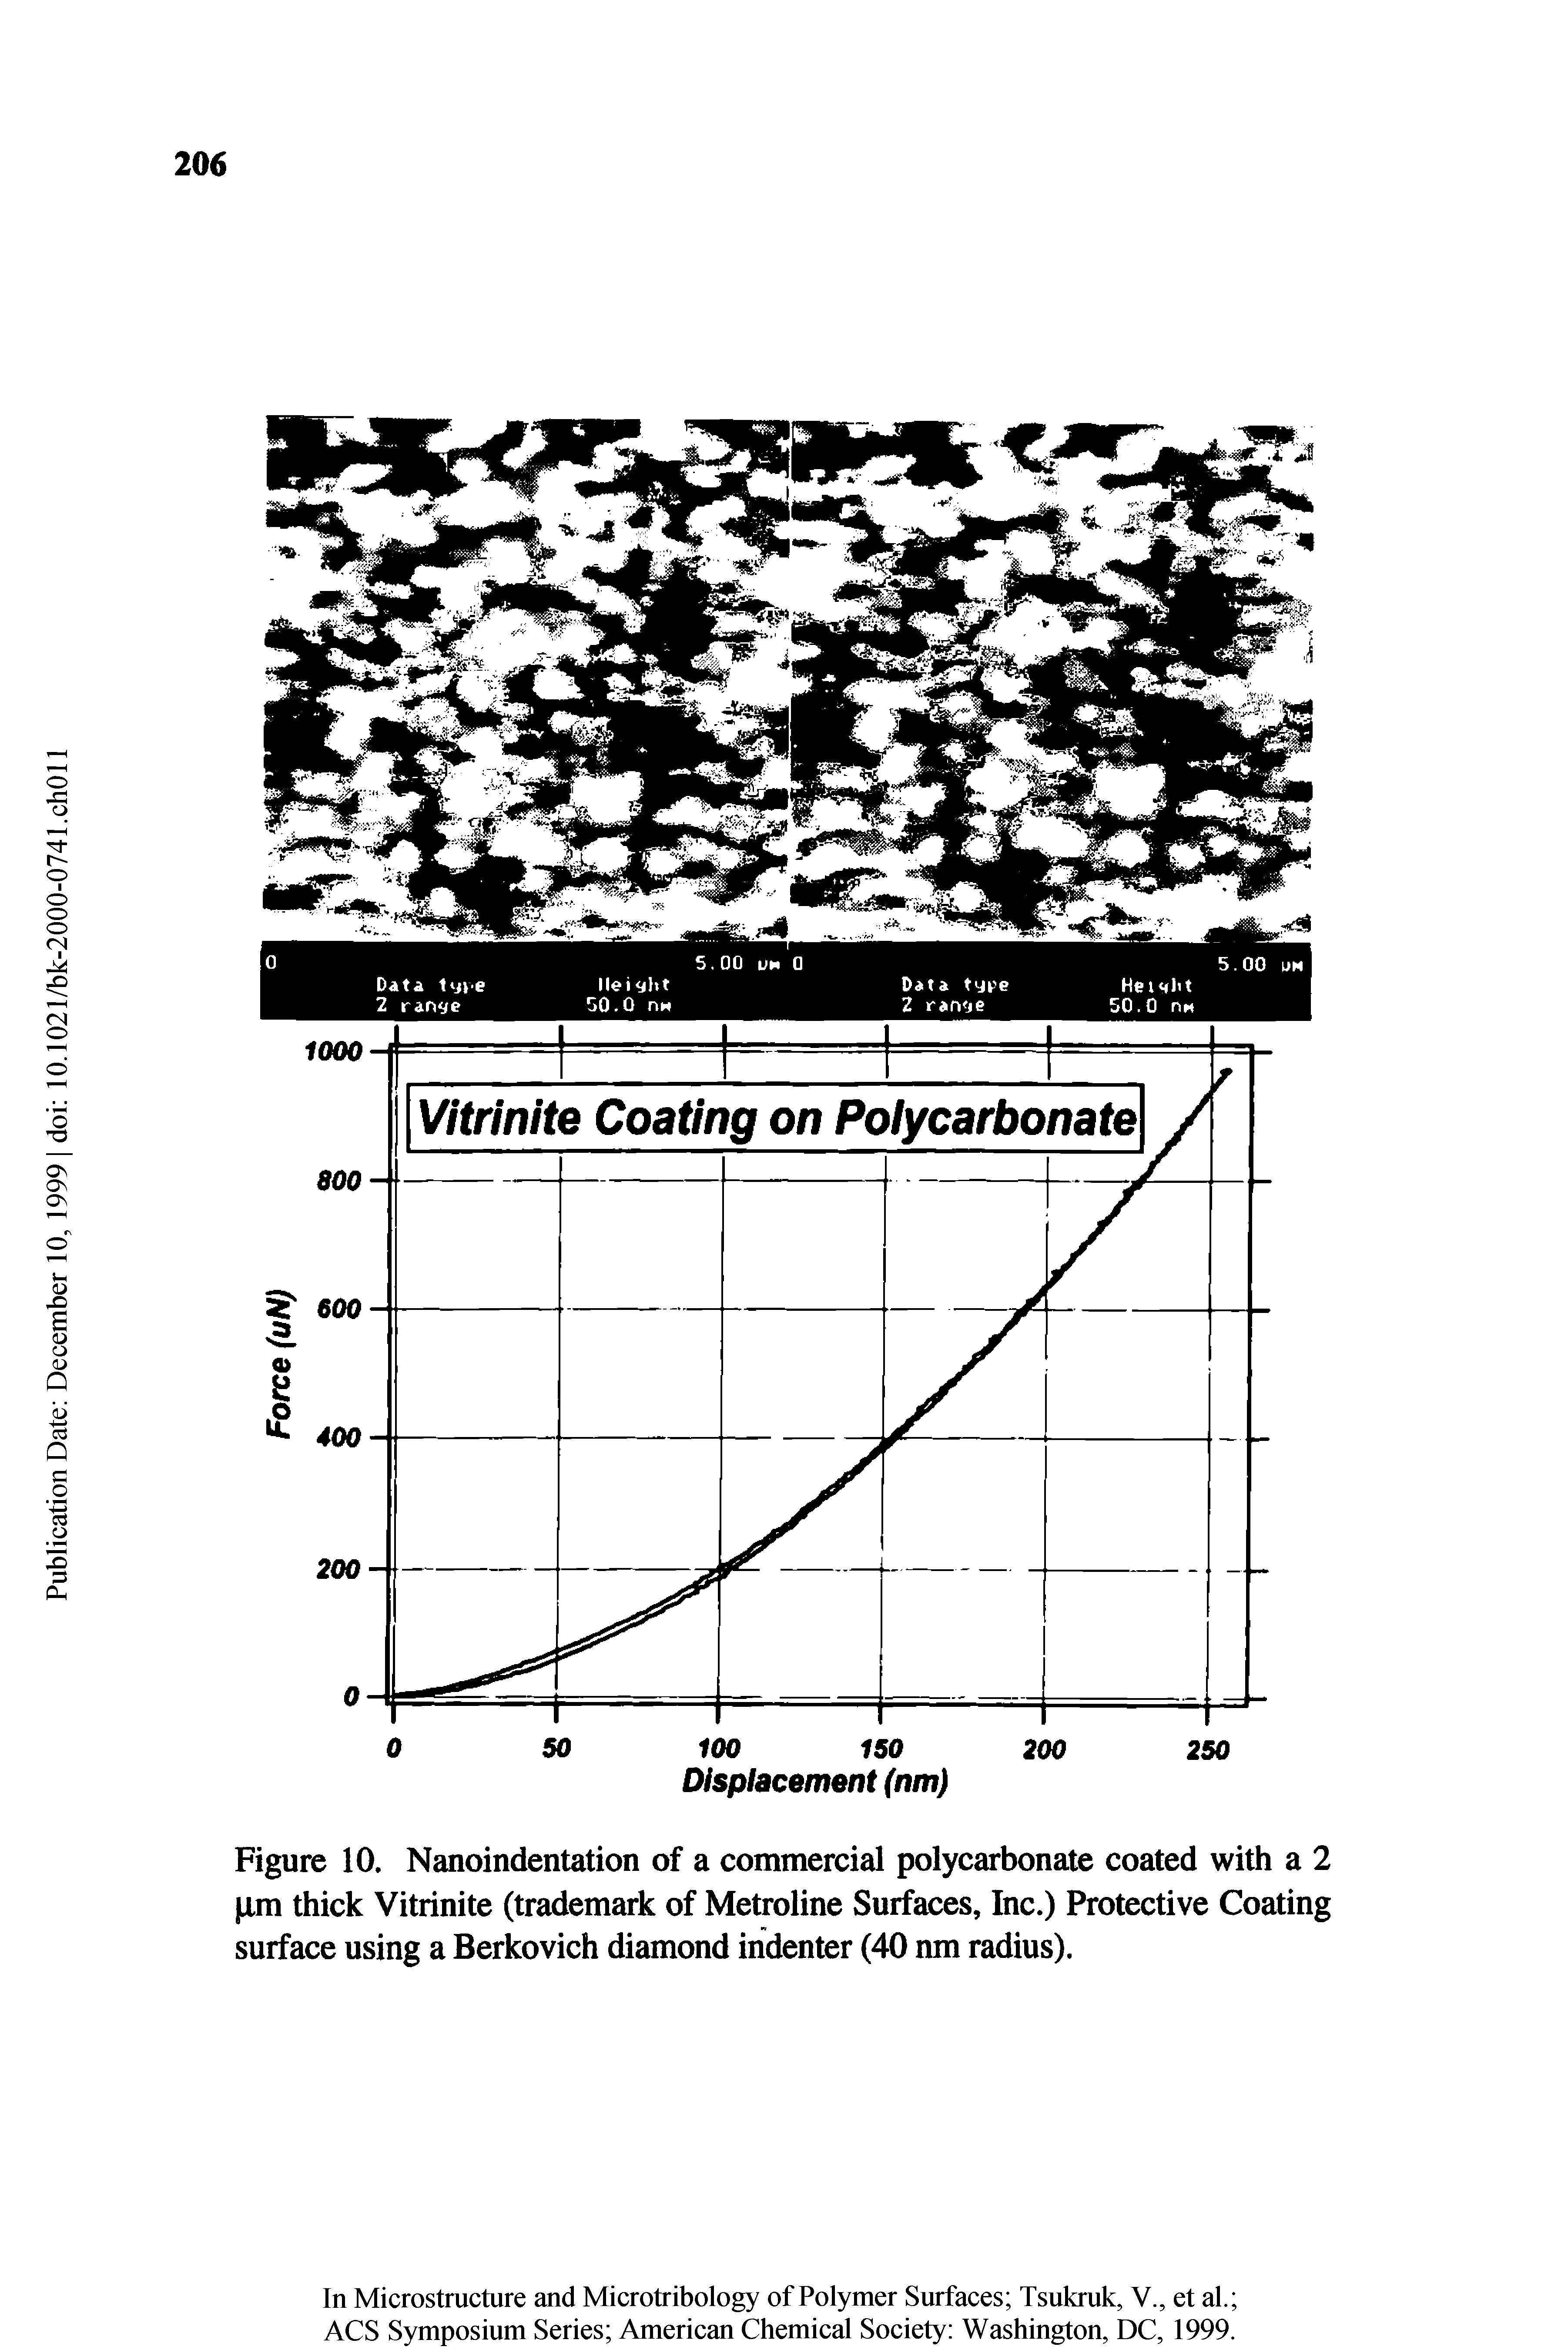 Figure 10. Nanoindentation of a commercial polycarbonate coated with a 2 im thick Vitrinite (trademark of Metroline Surfaces, Inc.) Protective Coating surface using a Berkovich diamond indenter (40 nm radius).